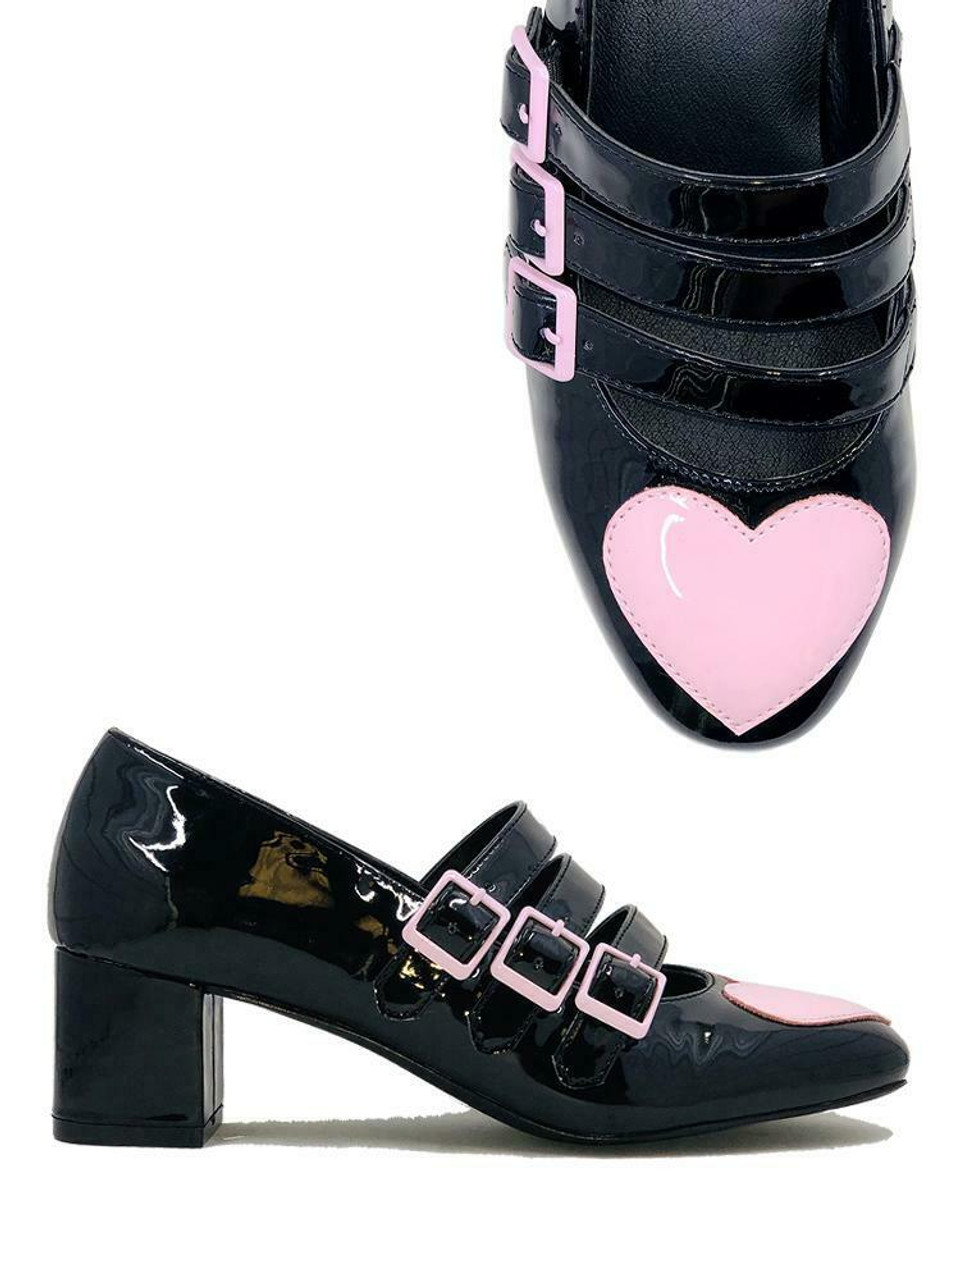 pink and black shoes heels